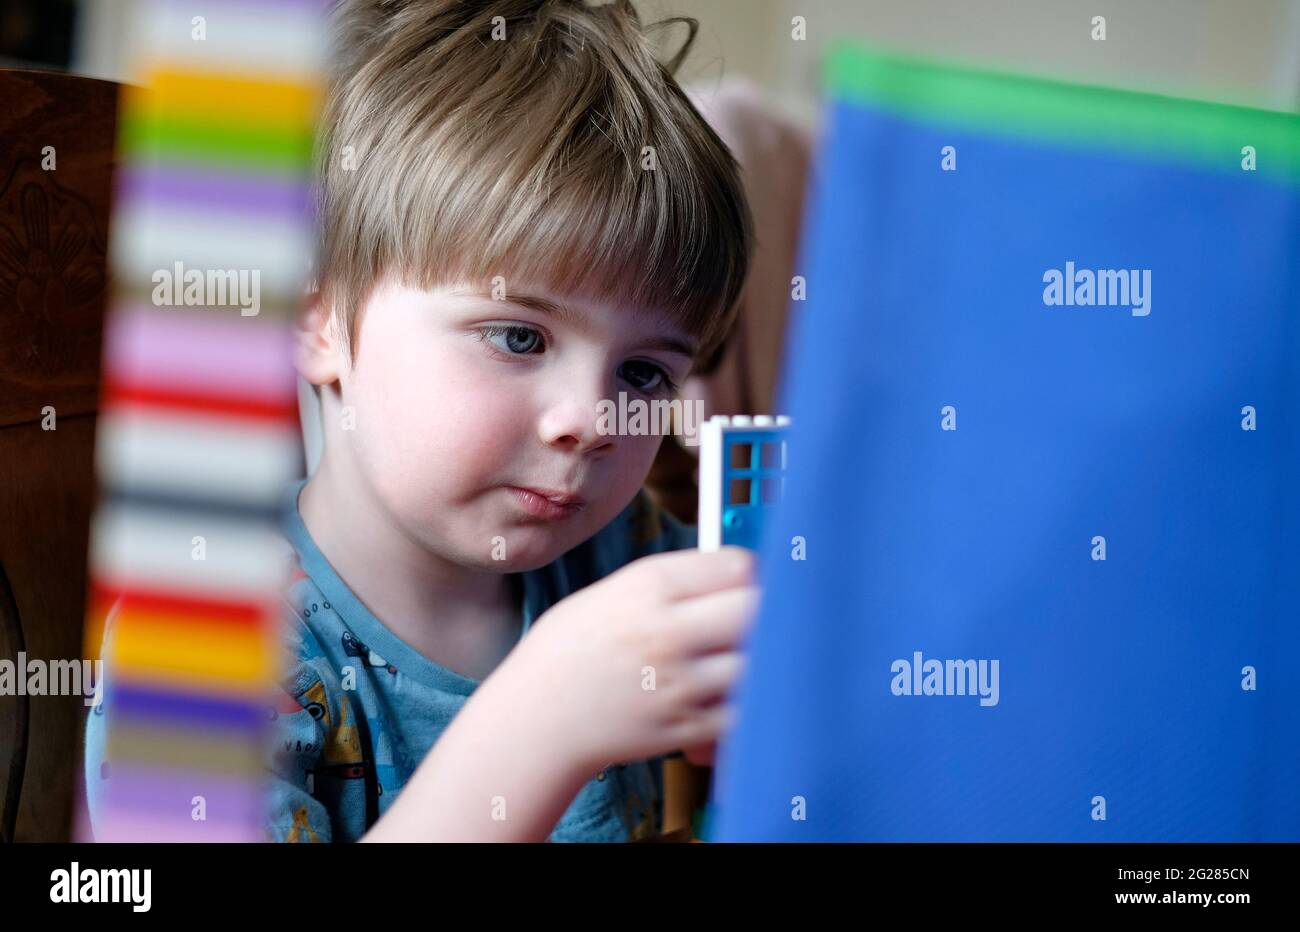 young 3 year old boy playing with lego bricks in home interior. norfolk, england Stock Photo